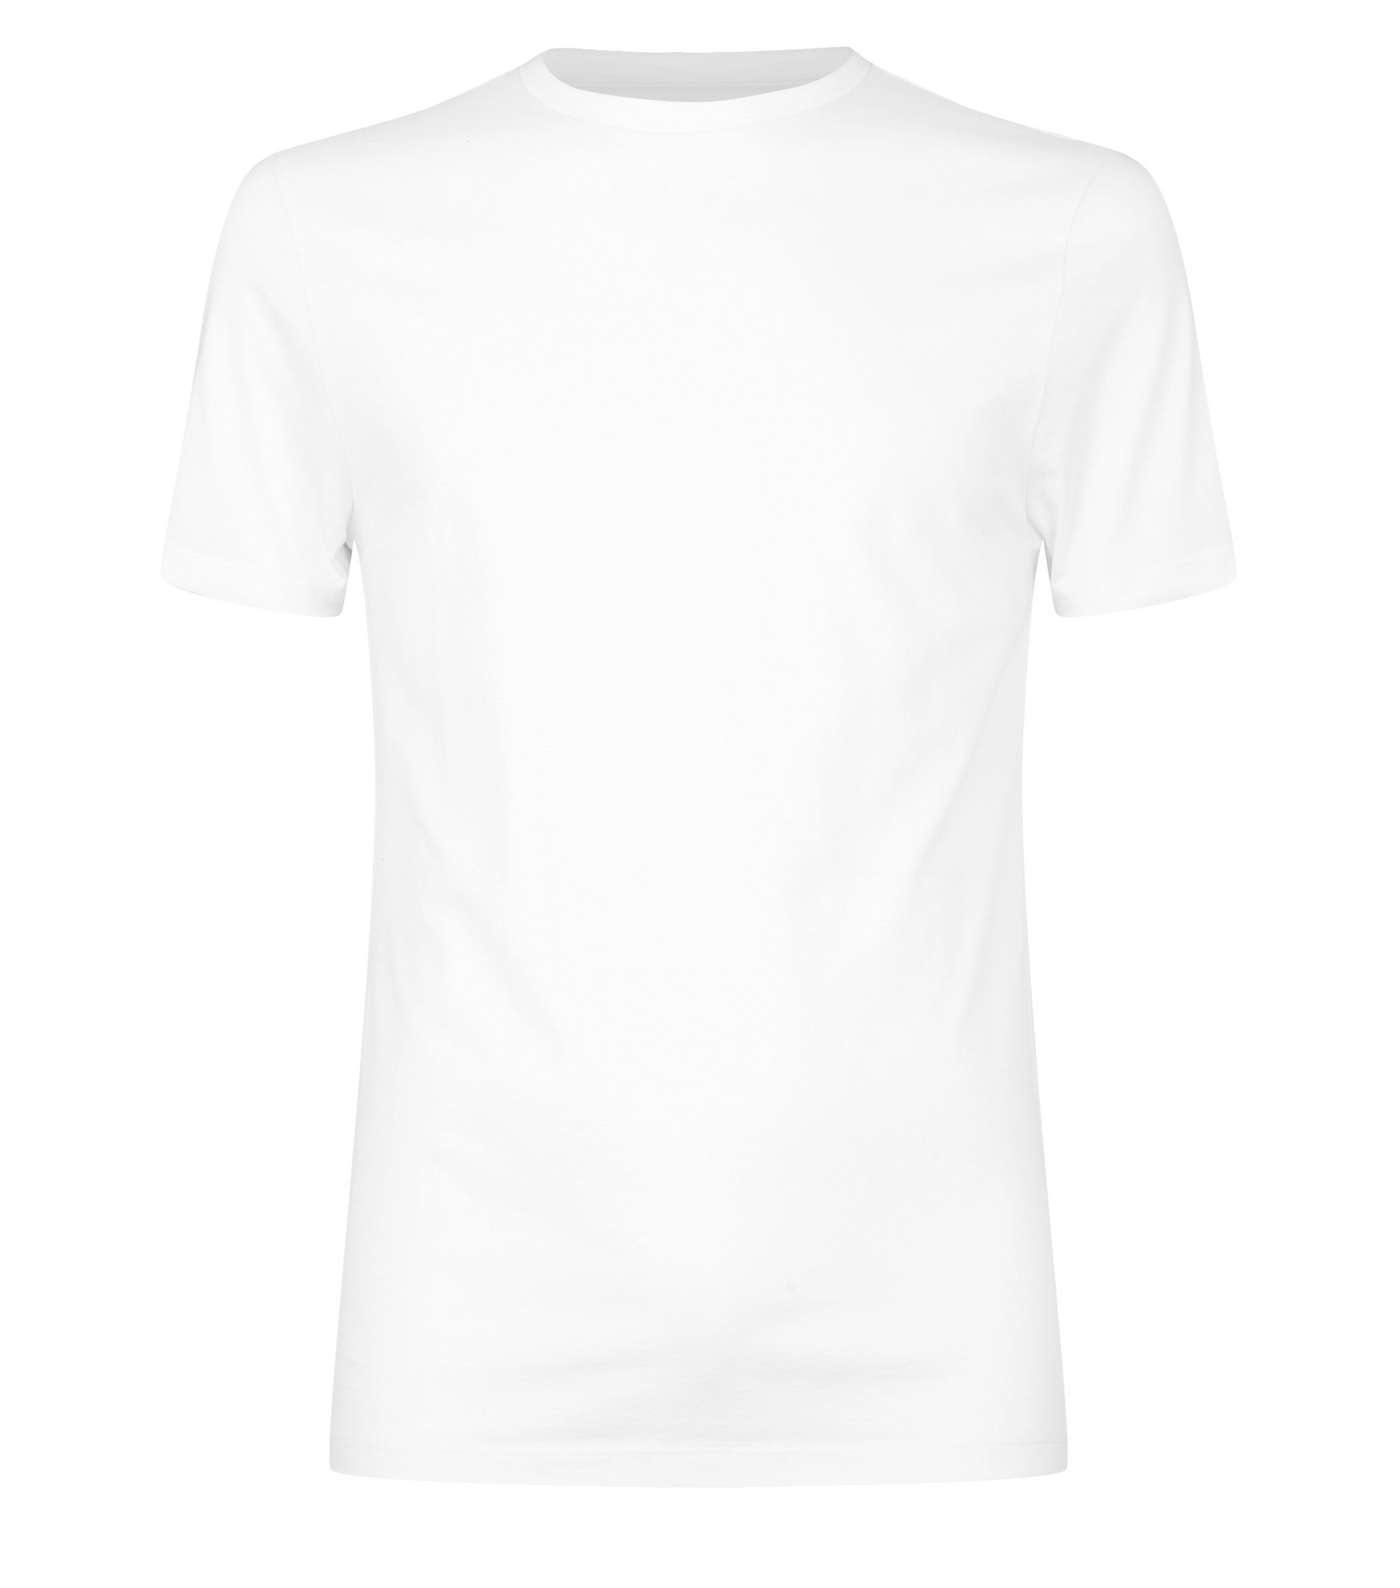 White Short Sleeve Muscle Fit T-Shirt Image 4